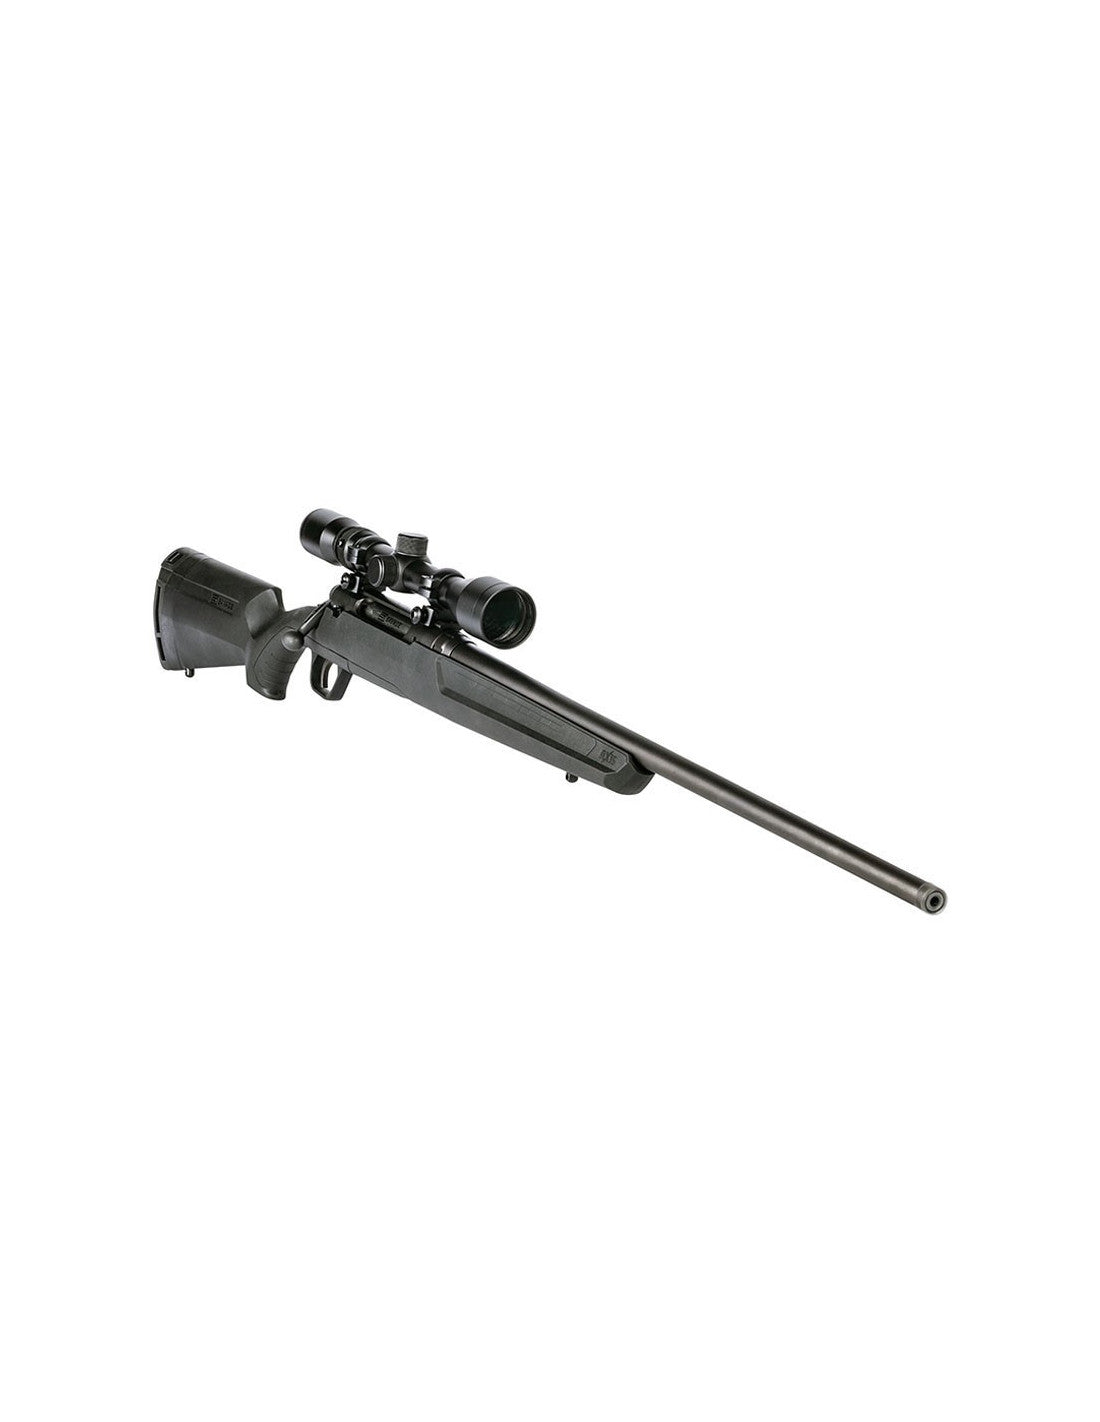 Axis Bolt Action Rifle